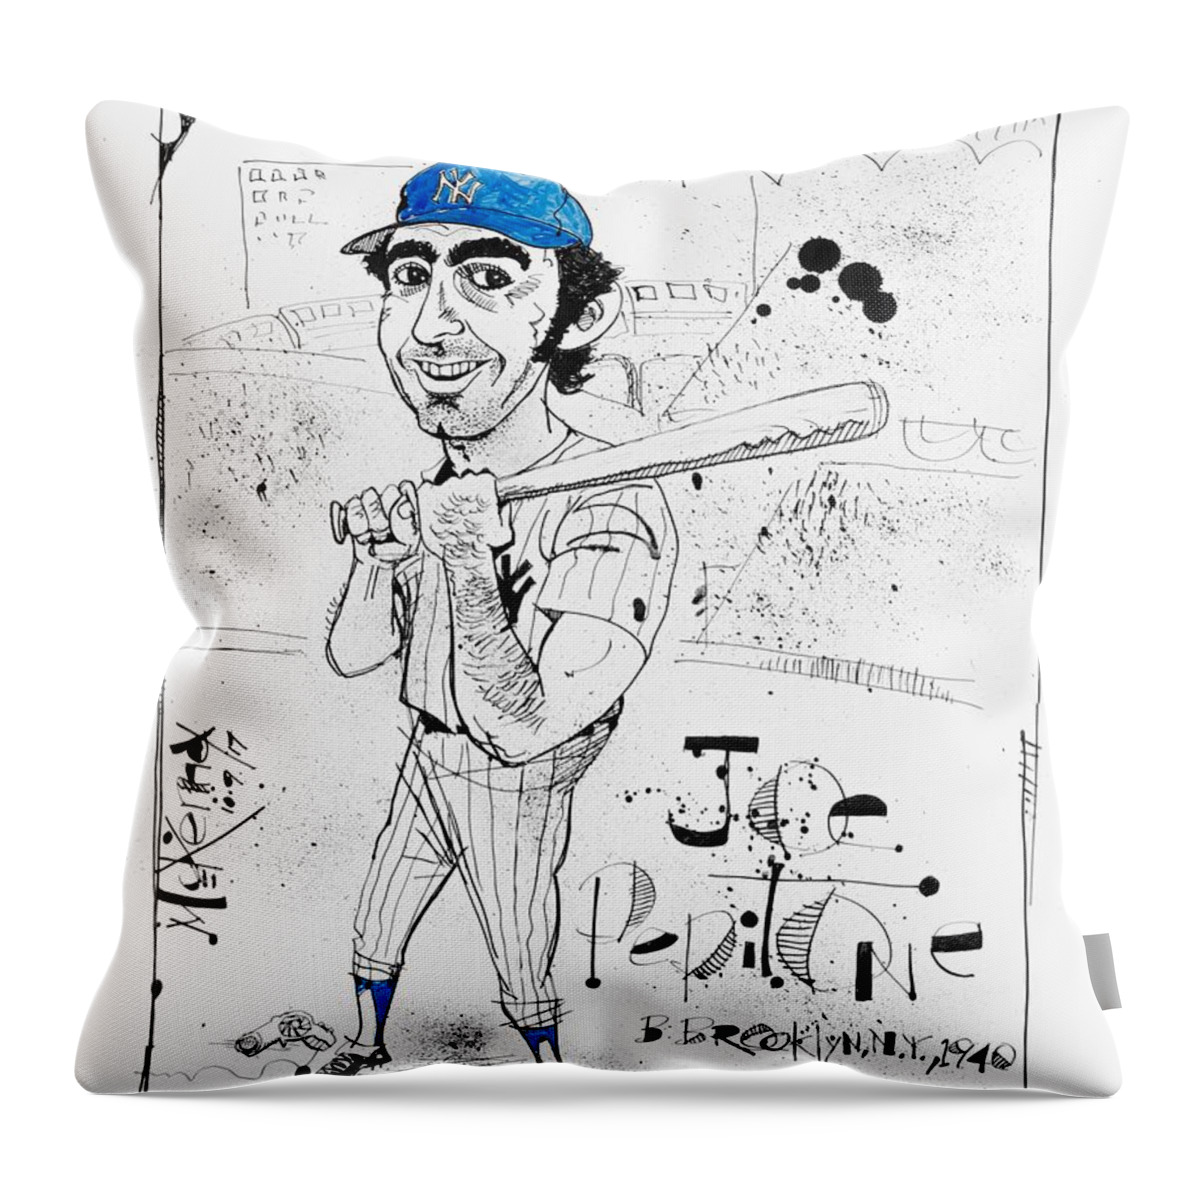  Throw Pillow featuring the drawing Joe Pepitone by Phil Mckenney